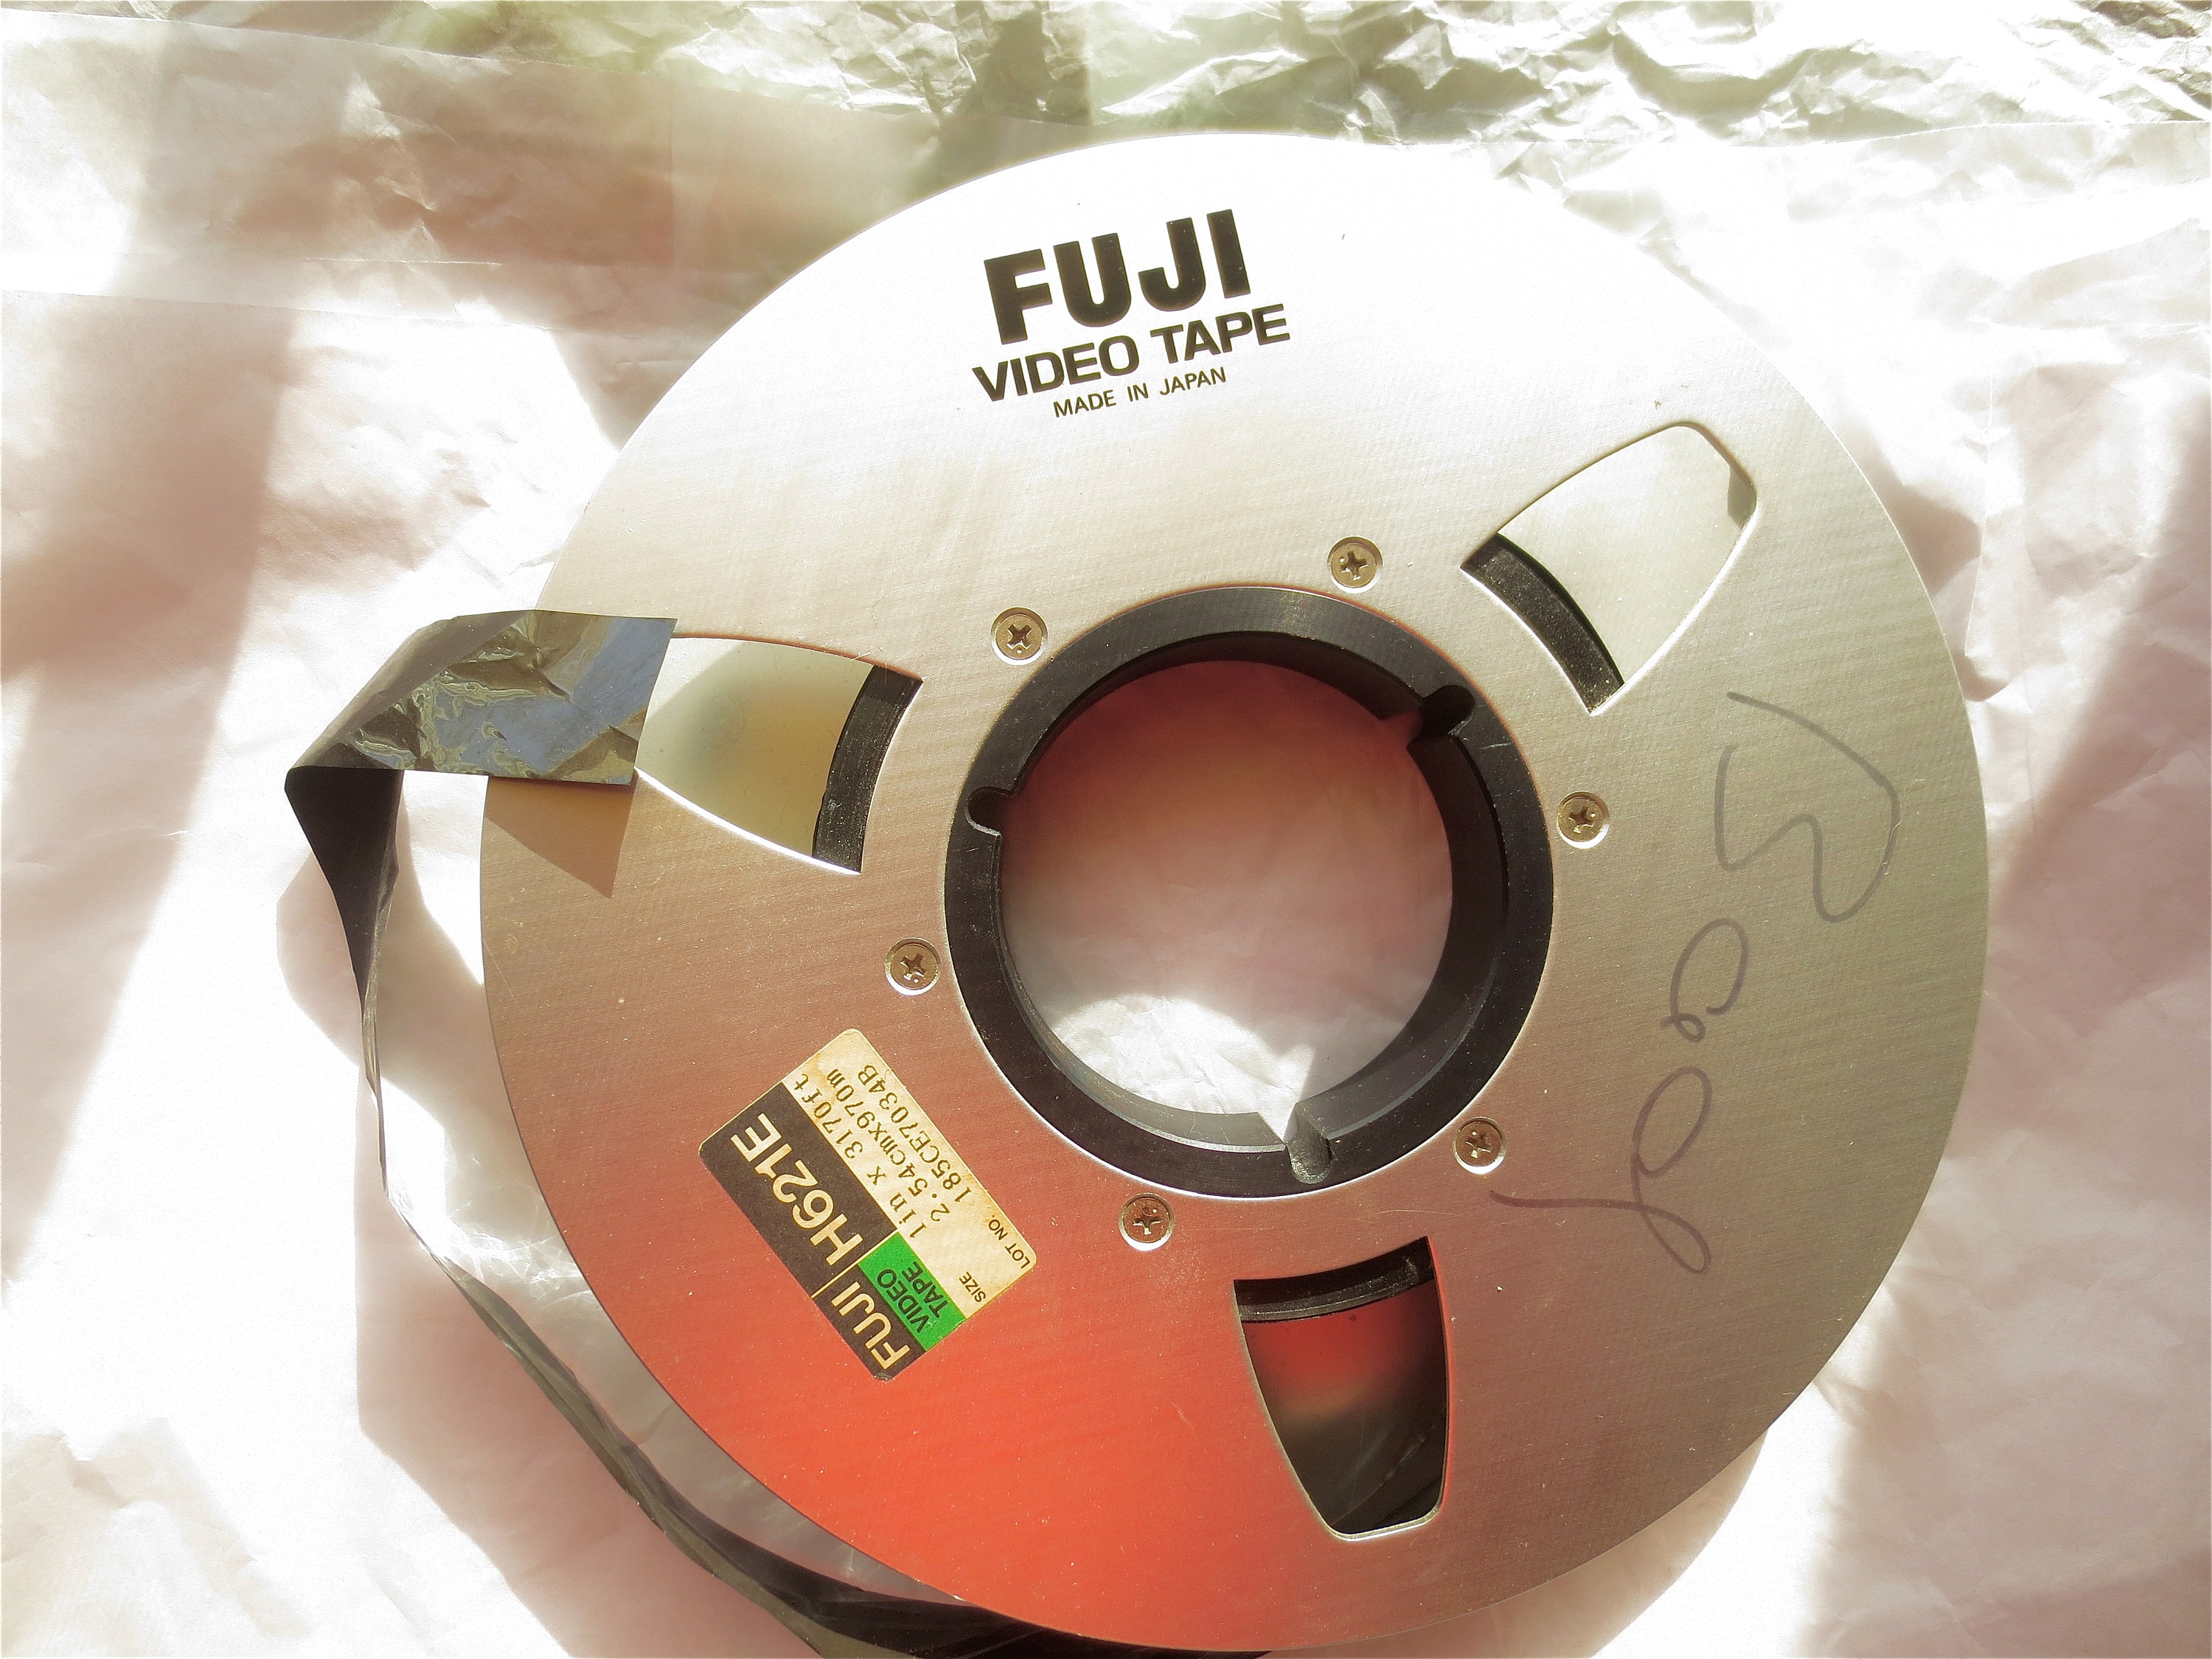 Old FUJI Video Tape Reel 1 in Bad Tape Rescued Editing Room Reject Aluminum  Reel H621E Novelty of No Use Whatsoever -  Finland